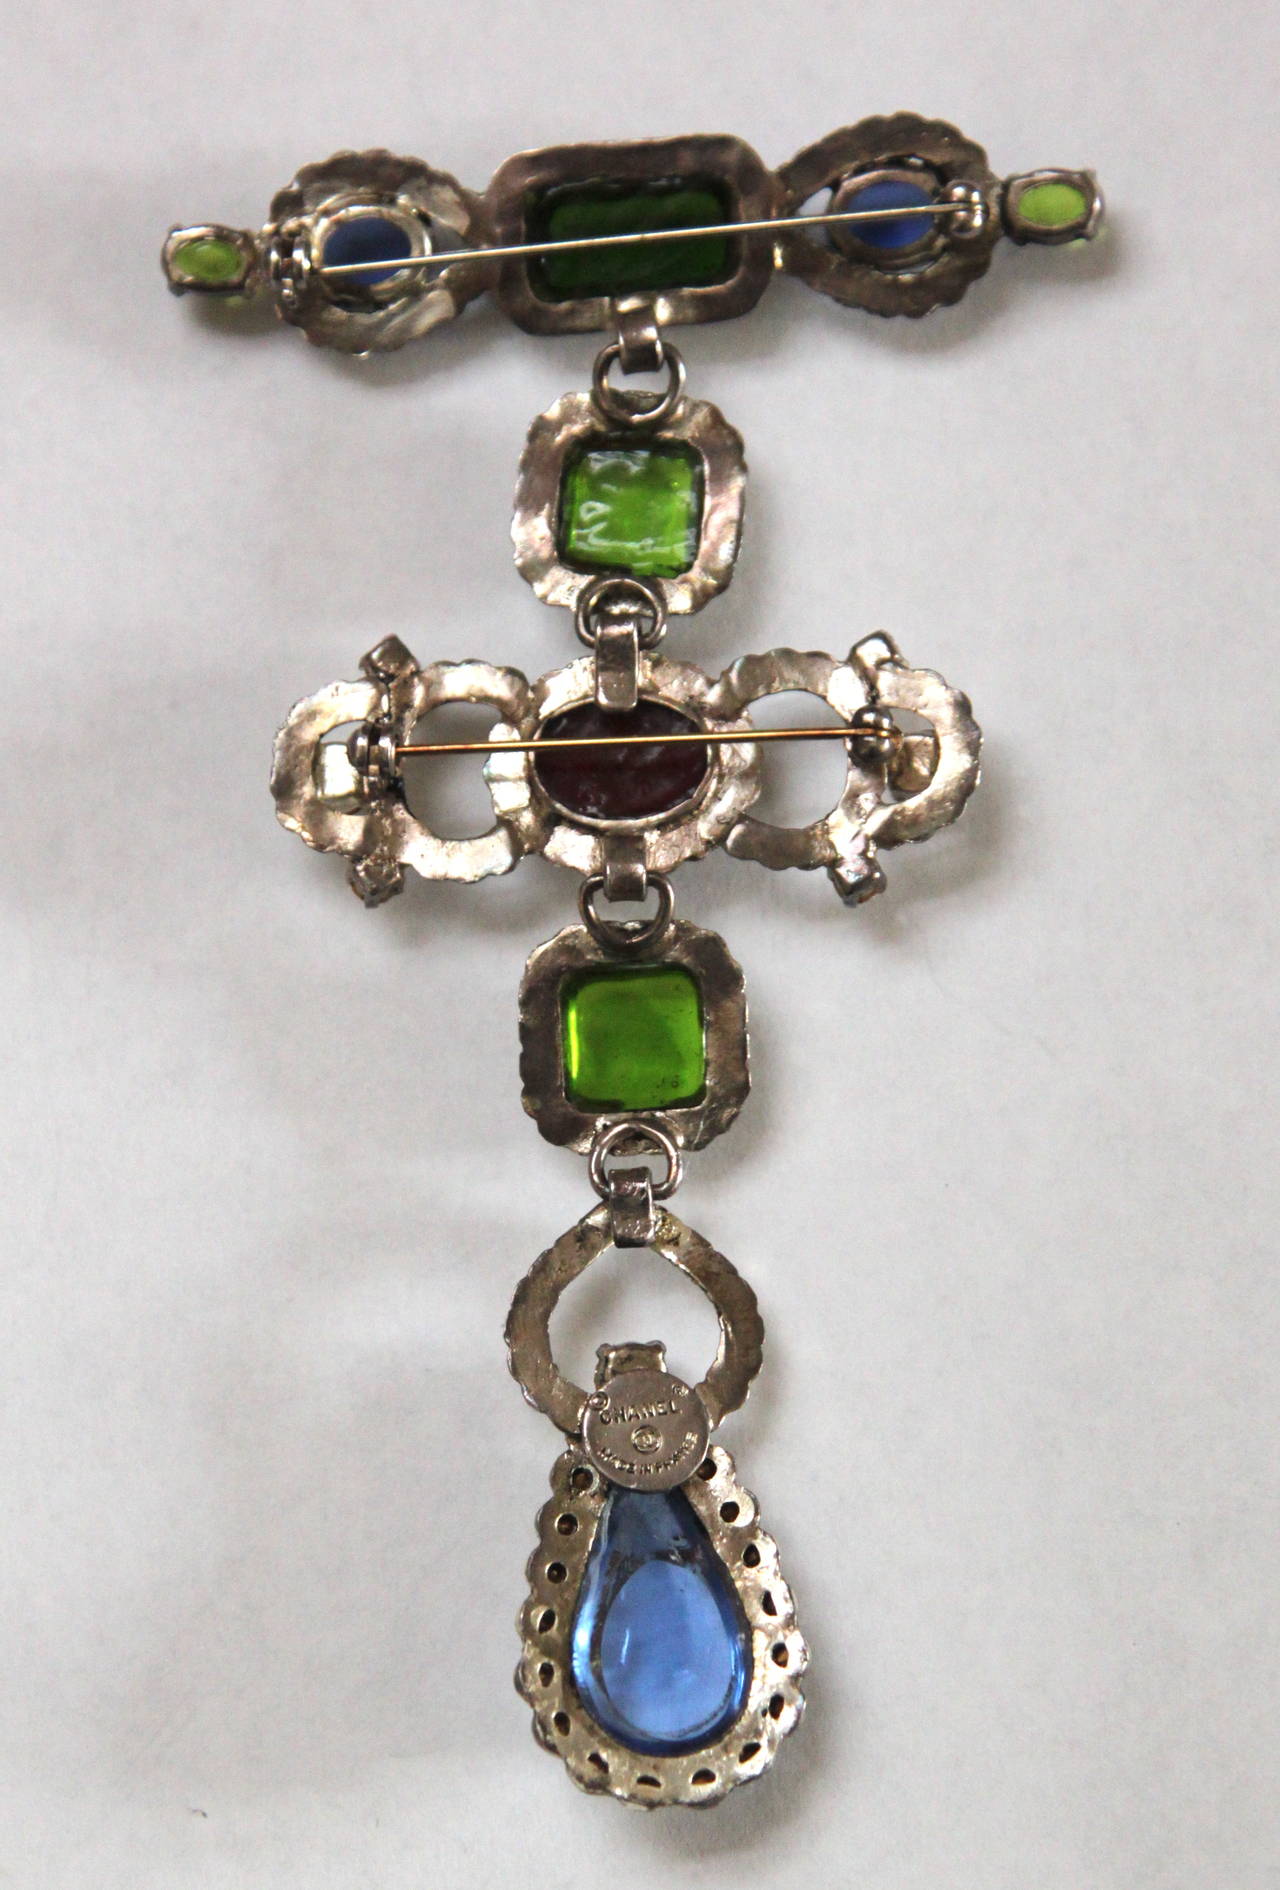 Very rare documented interchangeable rhinestone pendant/brooch with Gripoix poured glass from Chanel dating to the 1970's. Silver toned metal, clear rhinestones, and burgundy, green and blue poured glass. Piece can be worn numerous ways: it can be